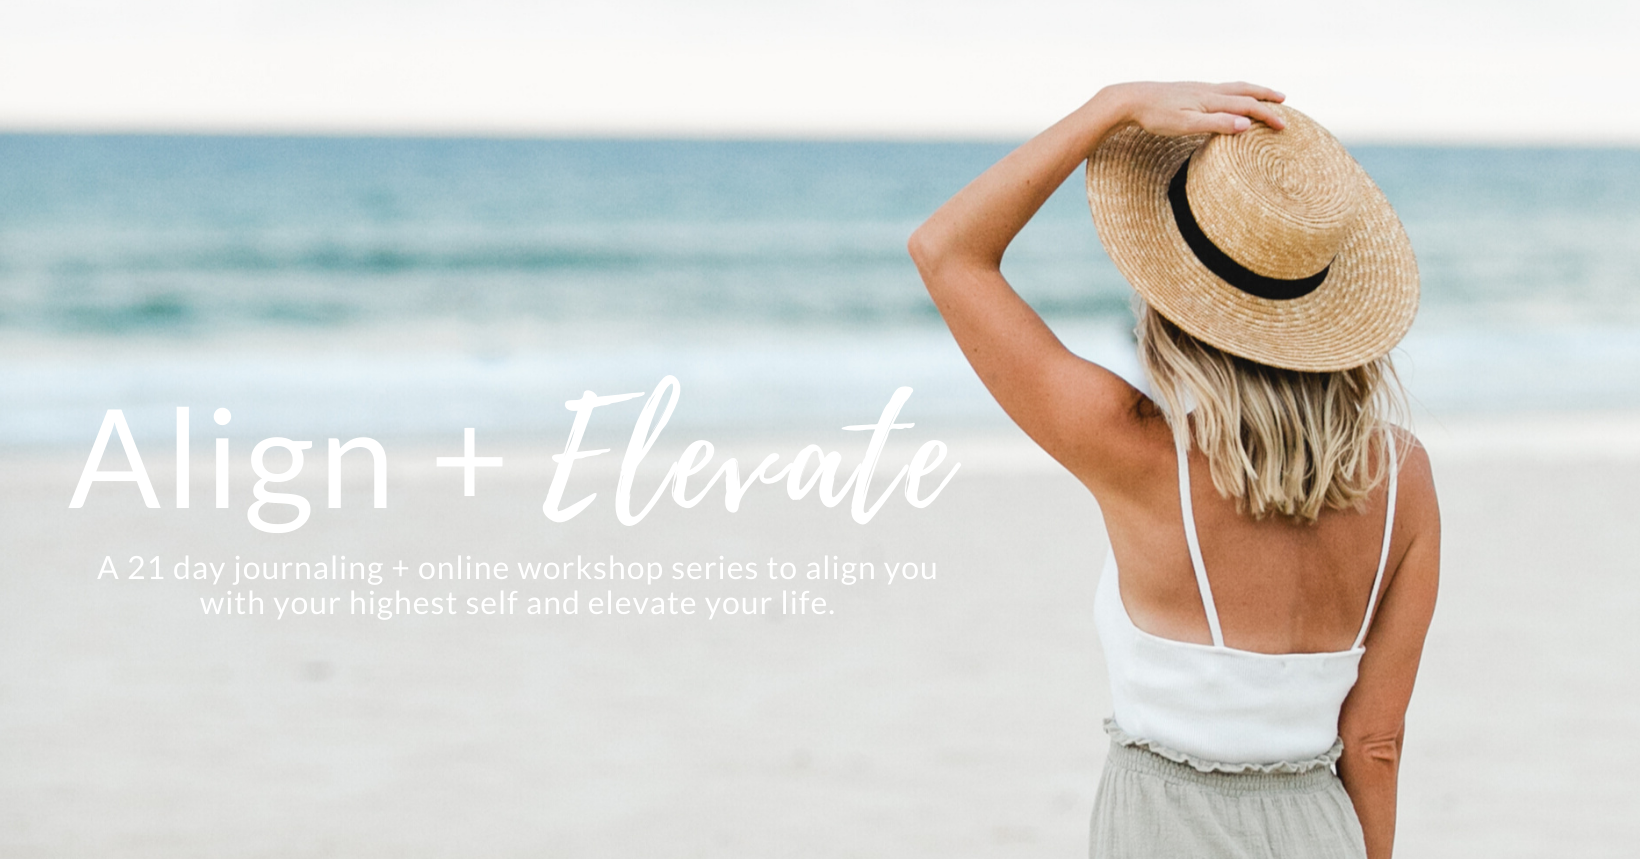 Align and Elevate Header